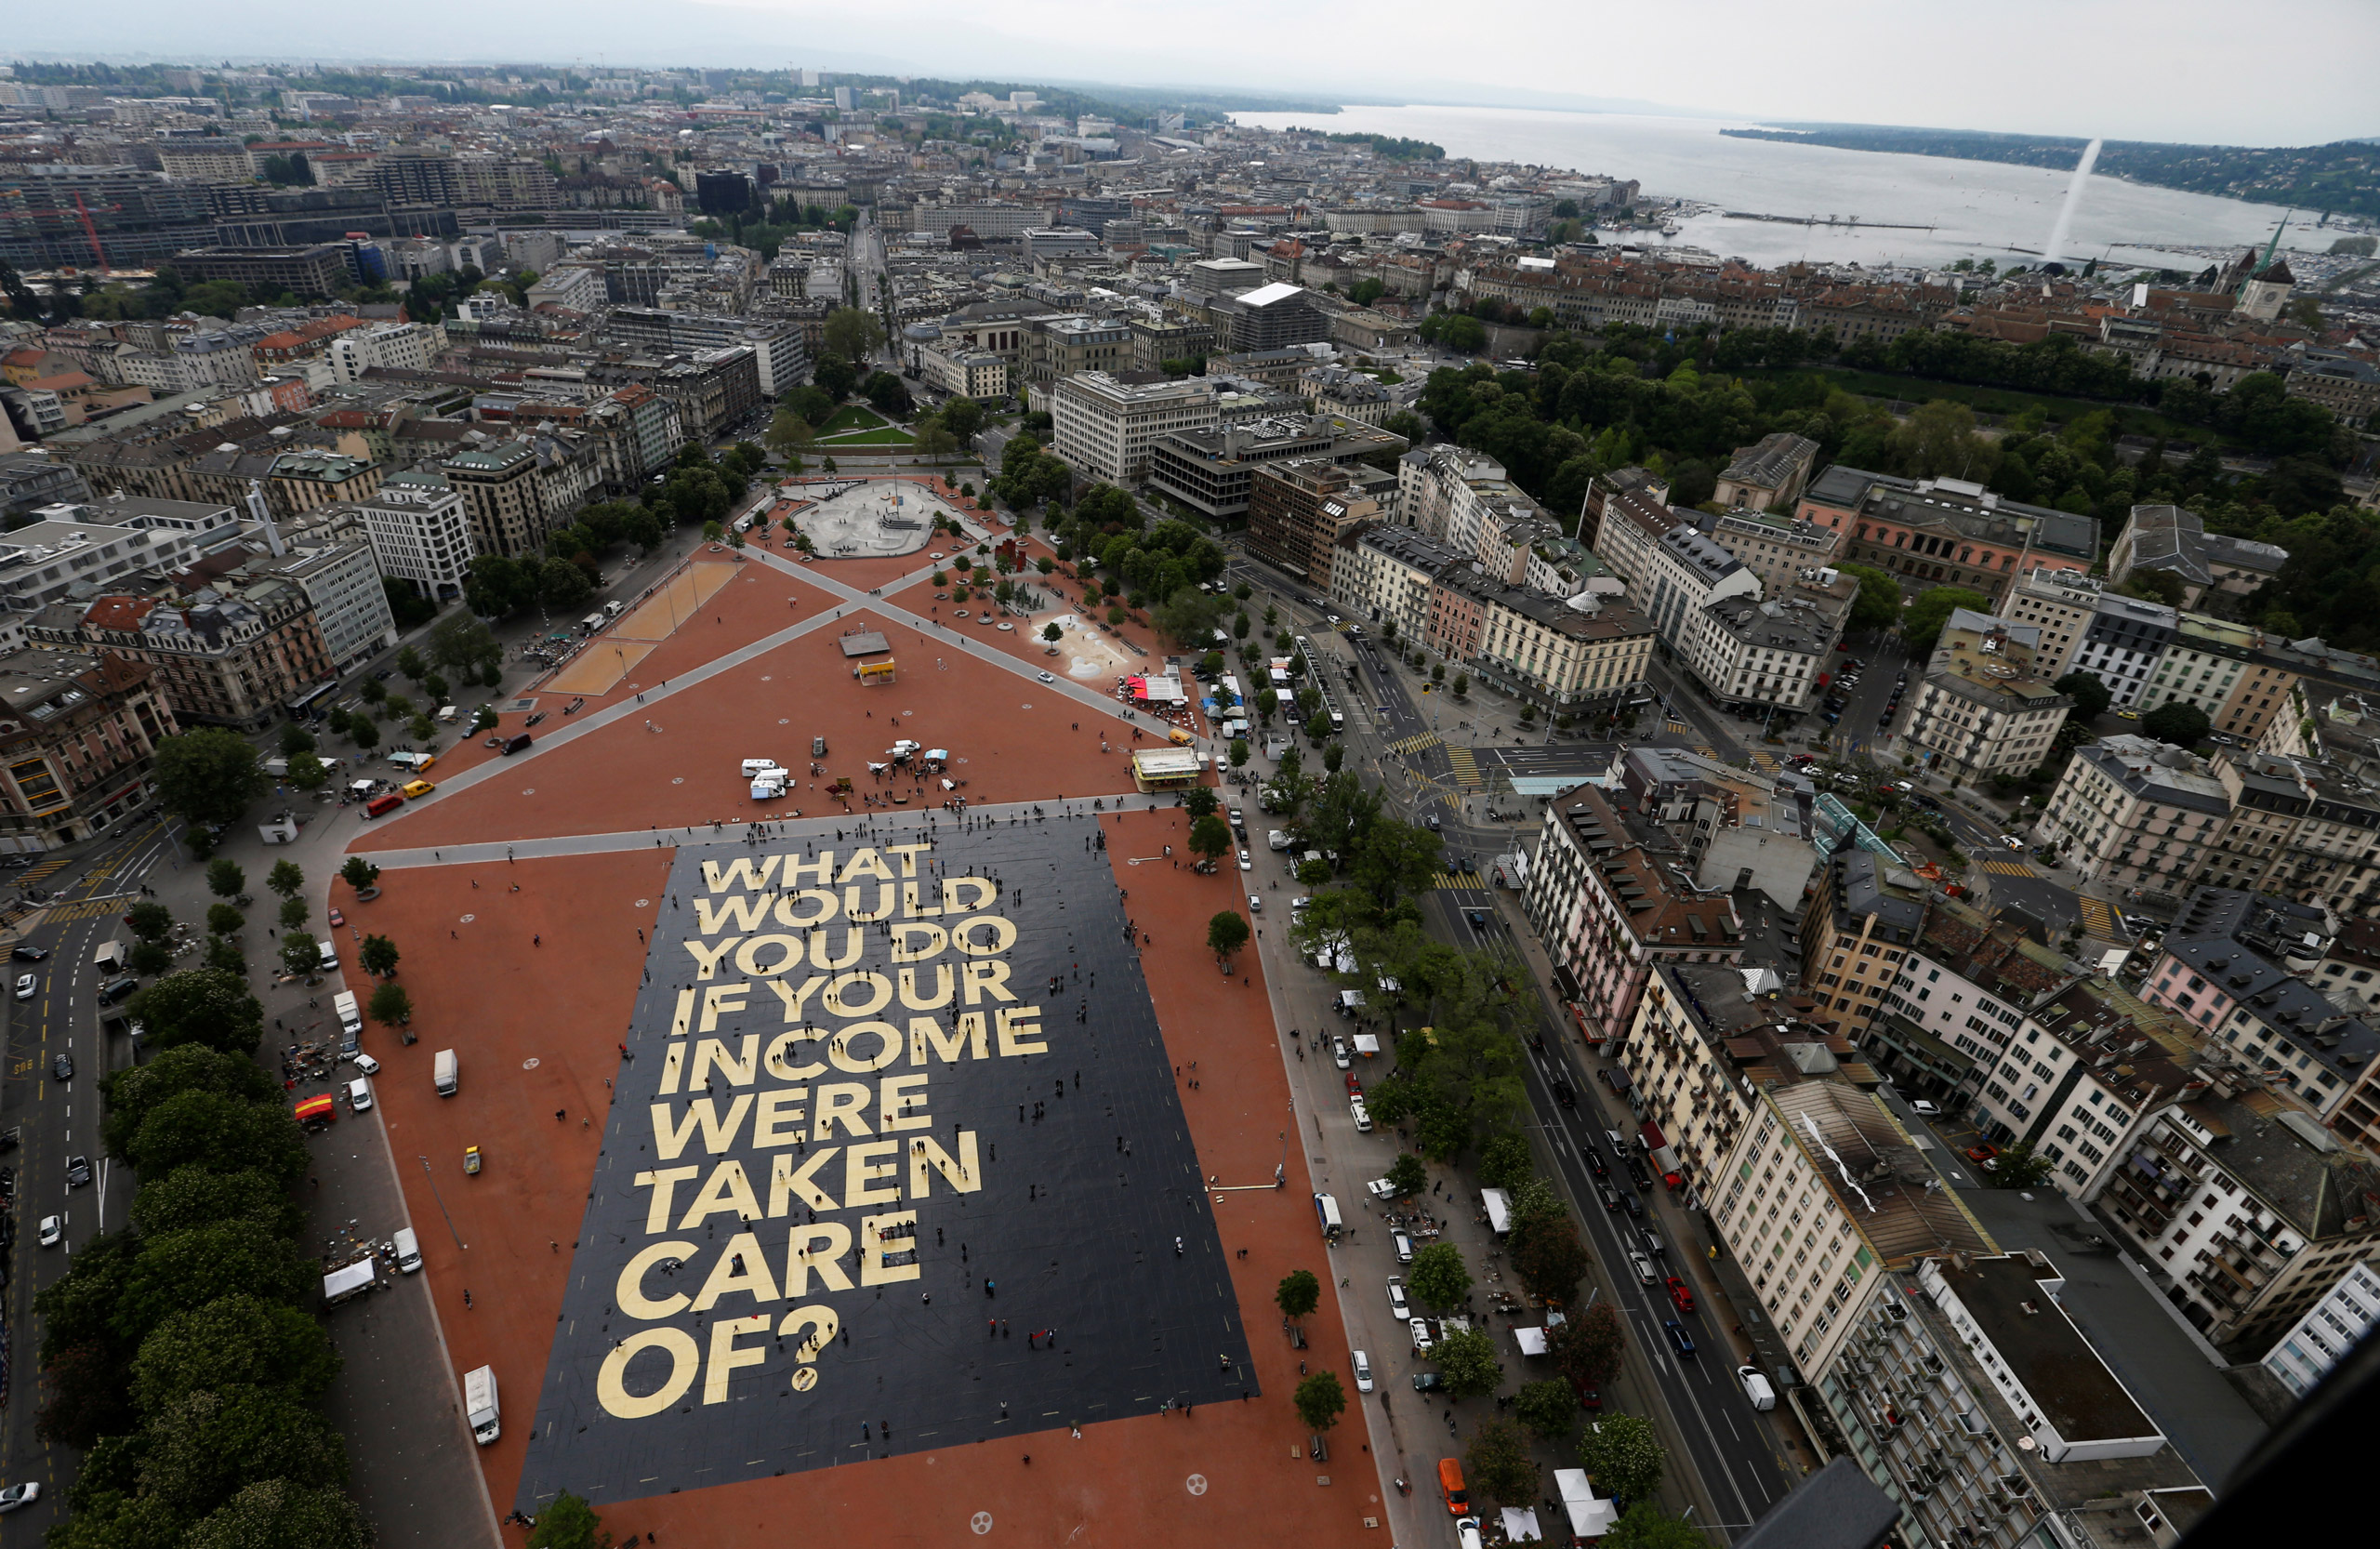 A 8,000 square meter poster is pictured on the Plainpalais square in Geneva, Switzerland May 14, 2016. The committee for the initiative for an "Unconditional Basic Income" has crowdfunded the "world's biggest poster", posing the question "What would you do if your income were taken care of?" (Denis Balibouse—Reuters)